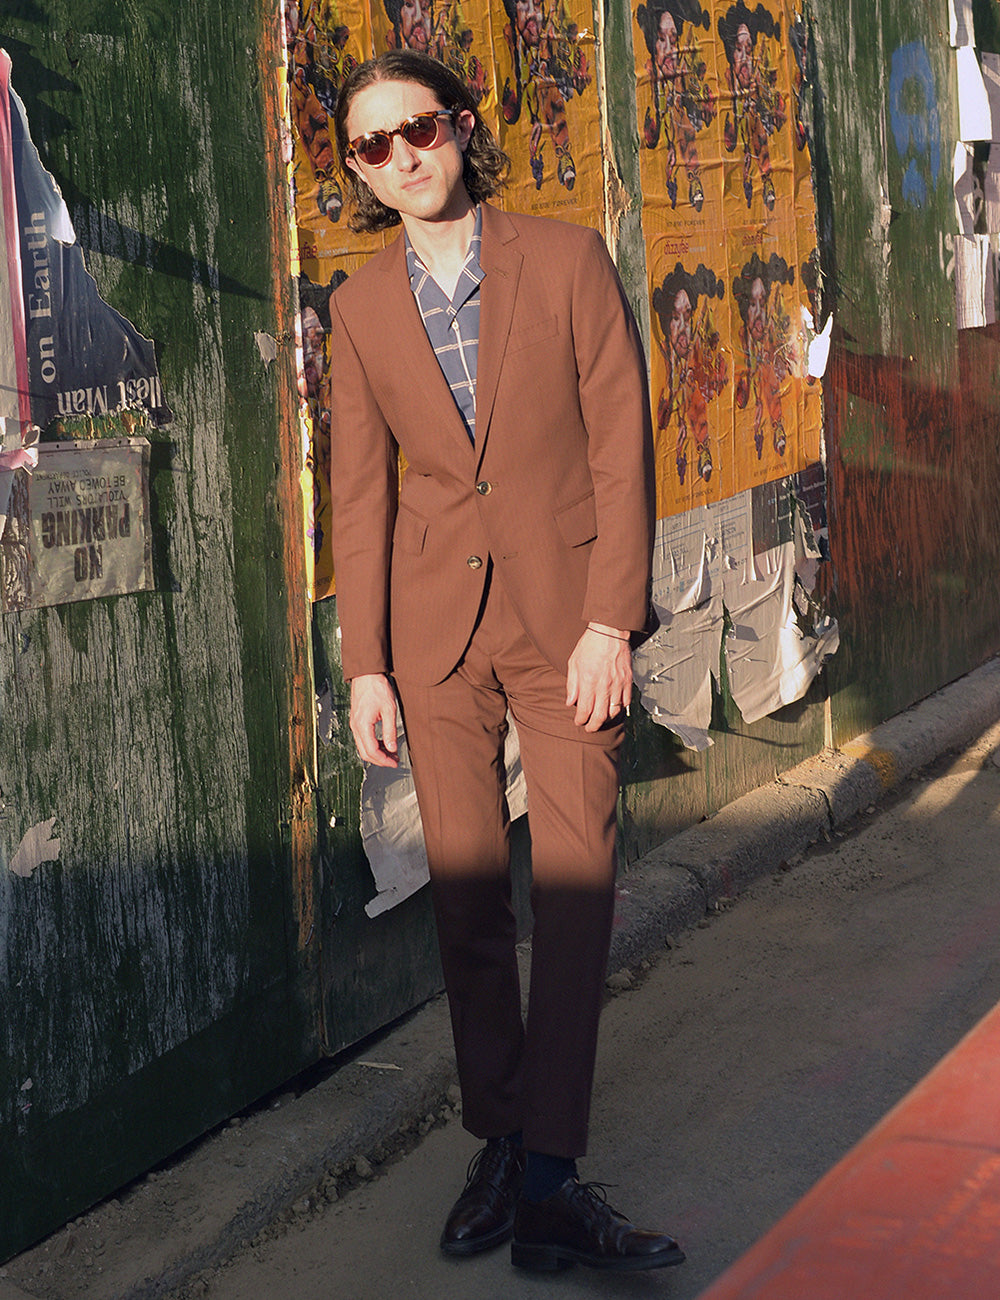 Model wears a rust/brown suit, blue check camp shirt, and sunglasses. He stands on a city street in front of a wall with posters and graffiti.